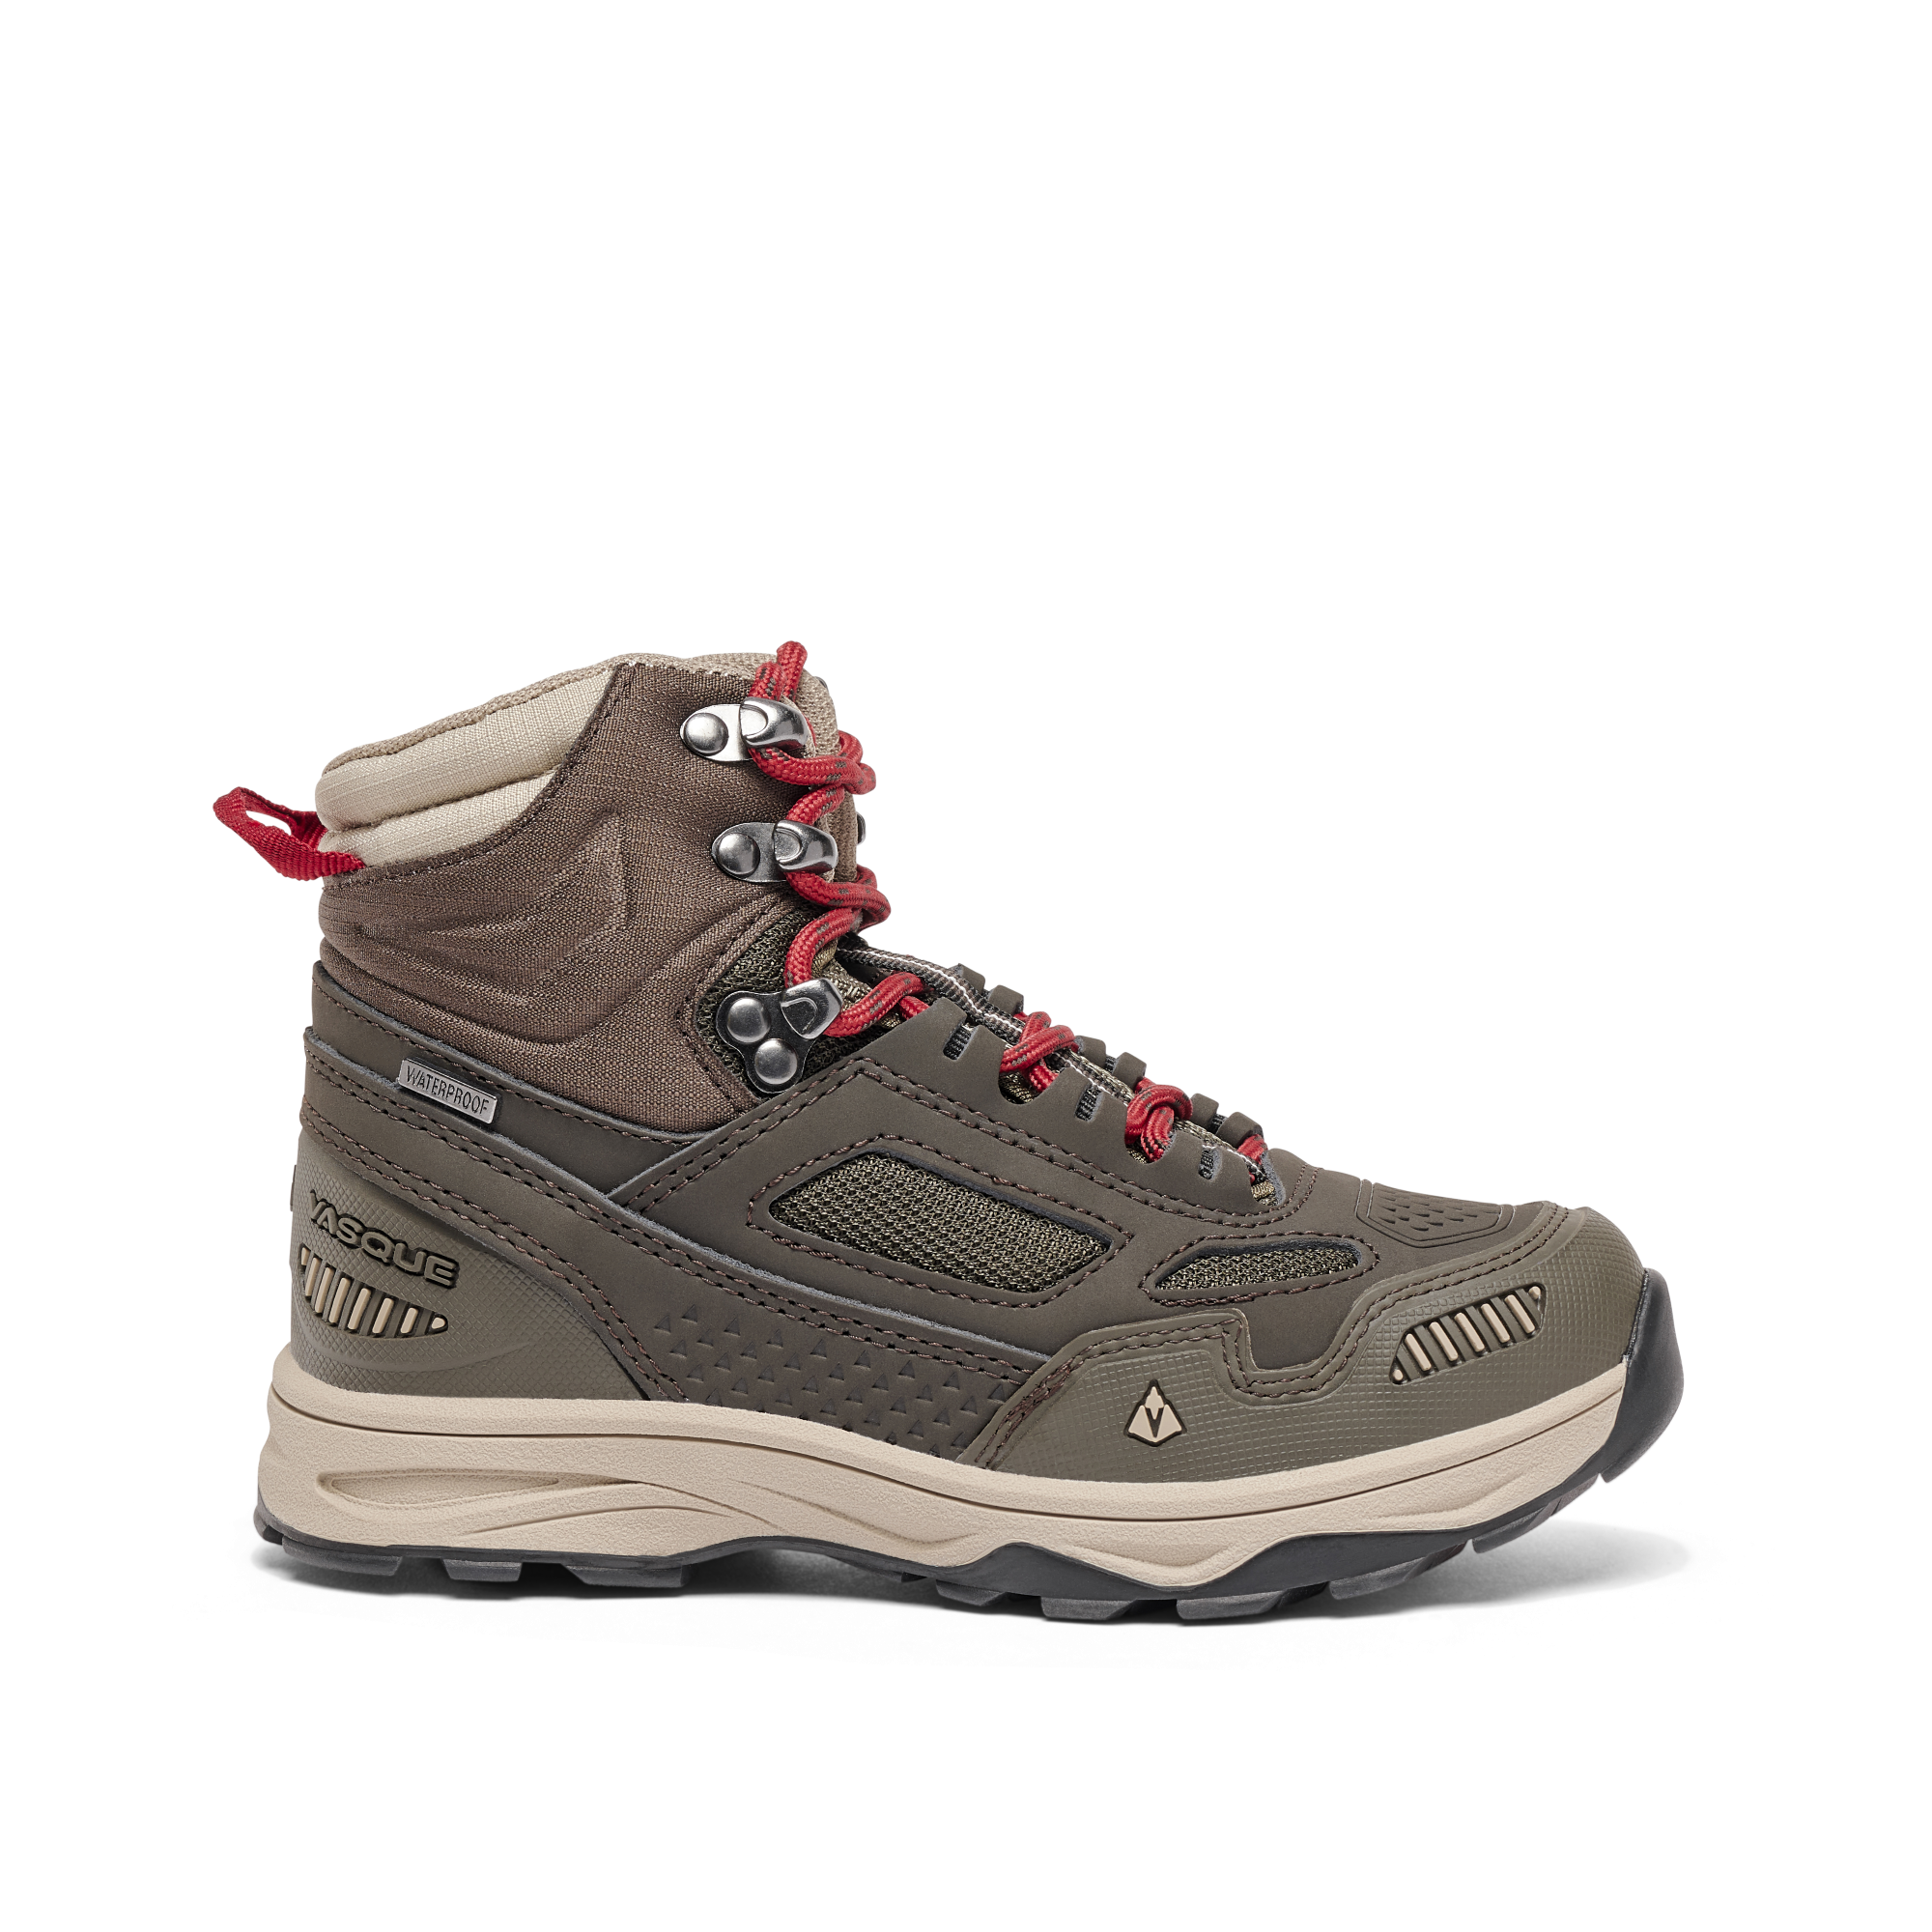 Vasque Breeze AT UltraDry Waterproof Hiking Boots for Kids - Olive - 12 Kids